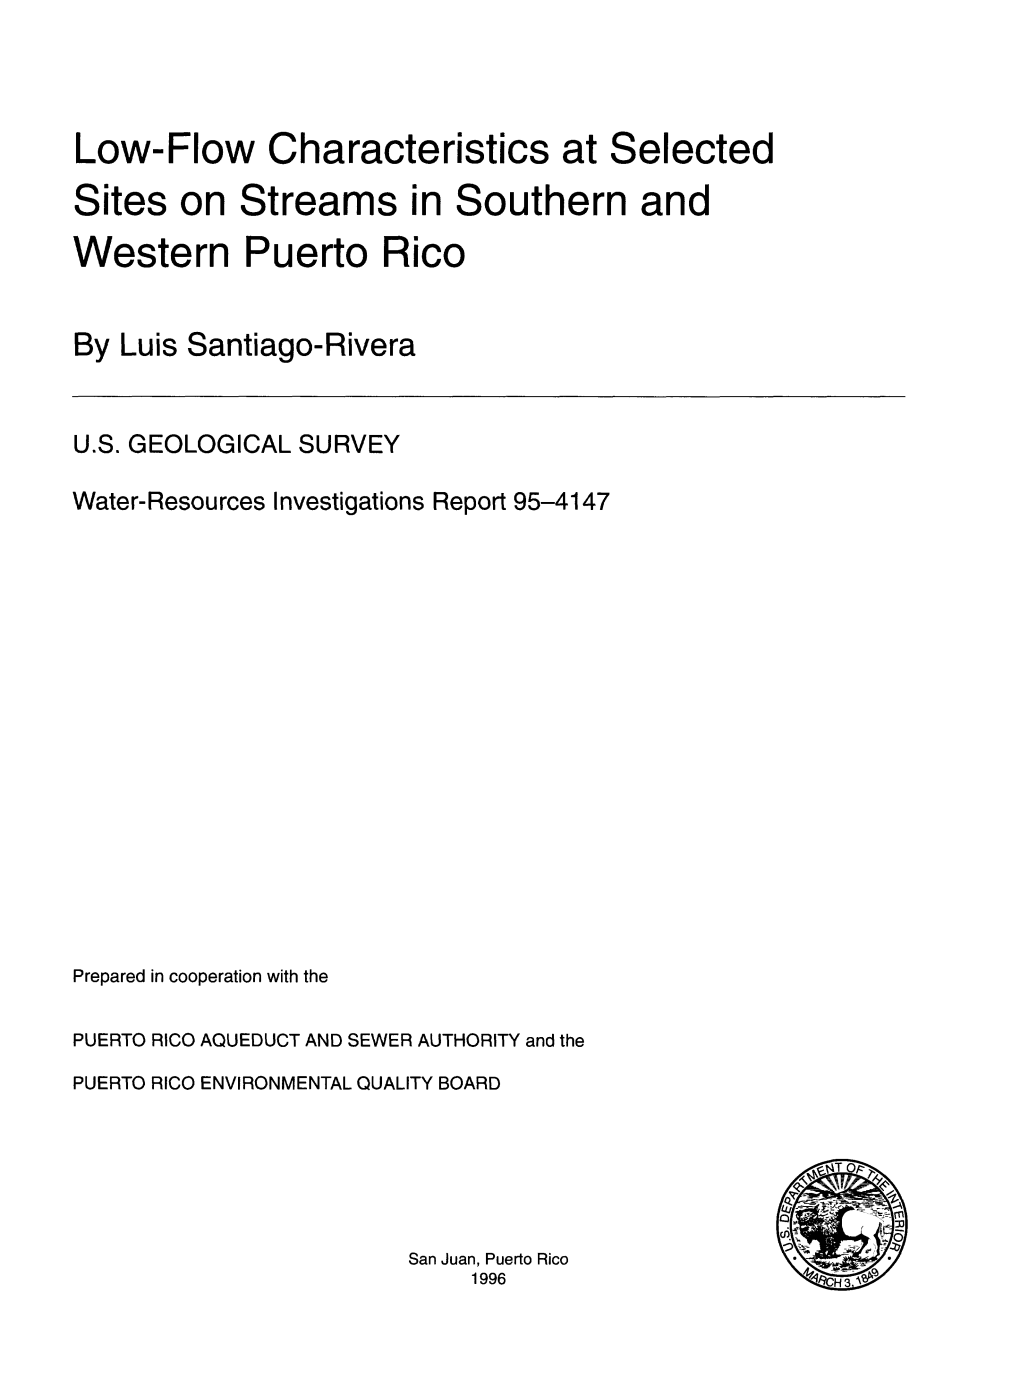 Low-Flow Characteristics at Selected Sites on Streams in Southern and Western Puerto Rico